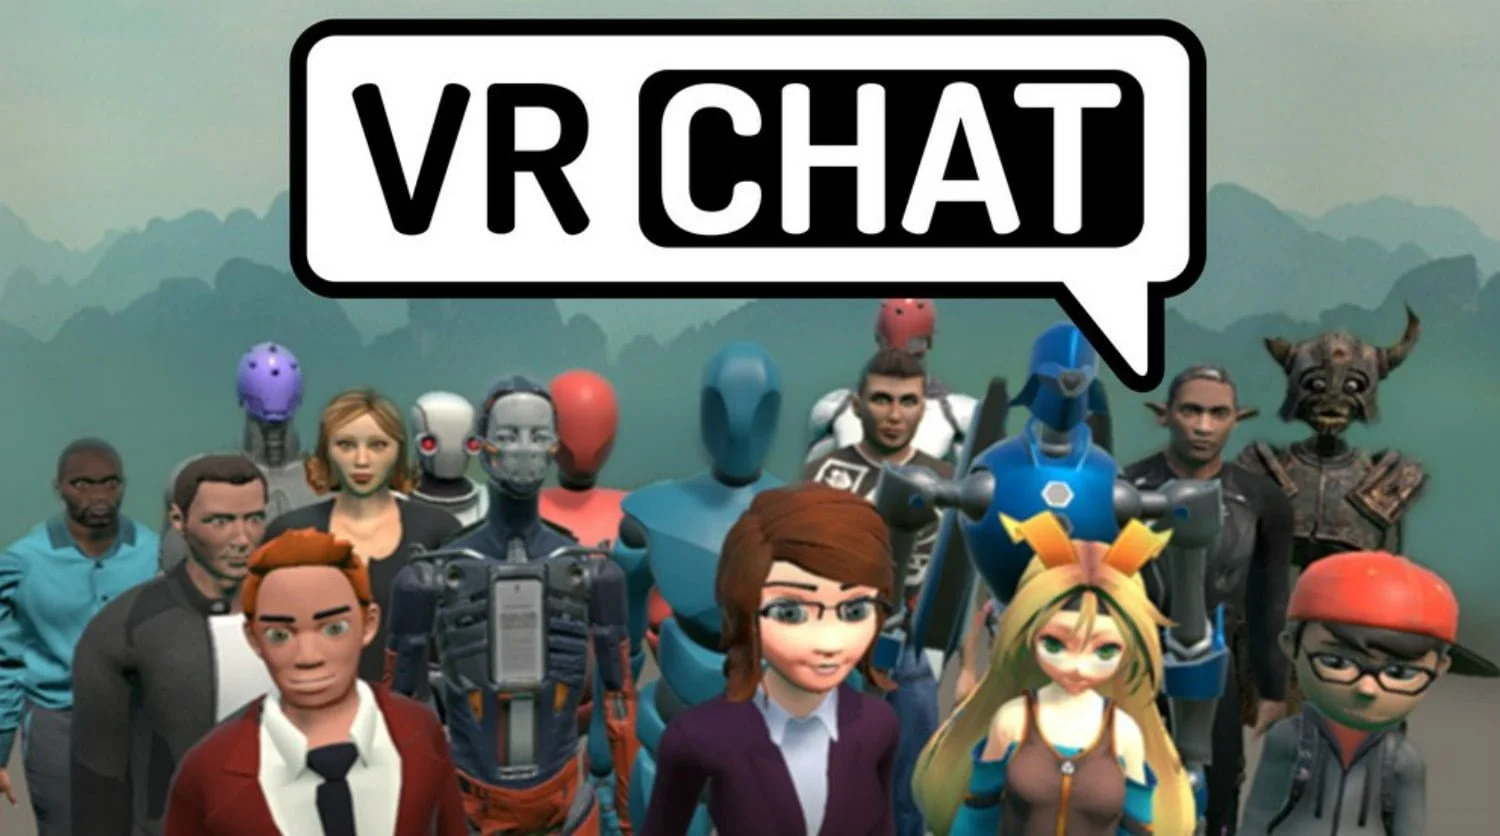 Best VR Chat Worlds: VR Chat Game